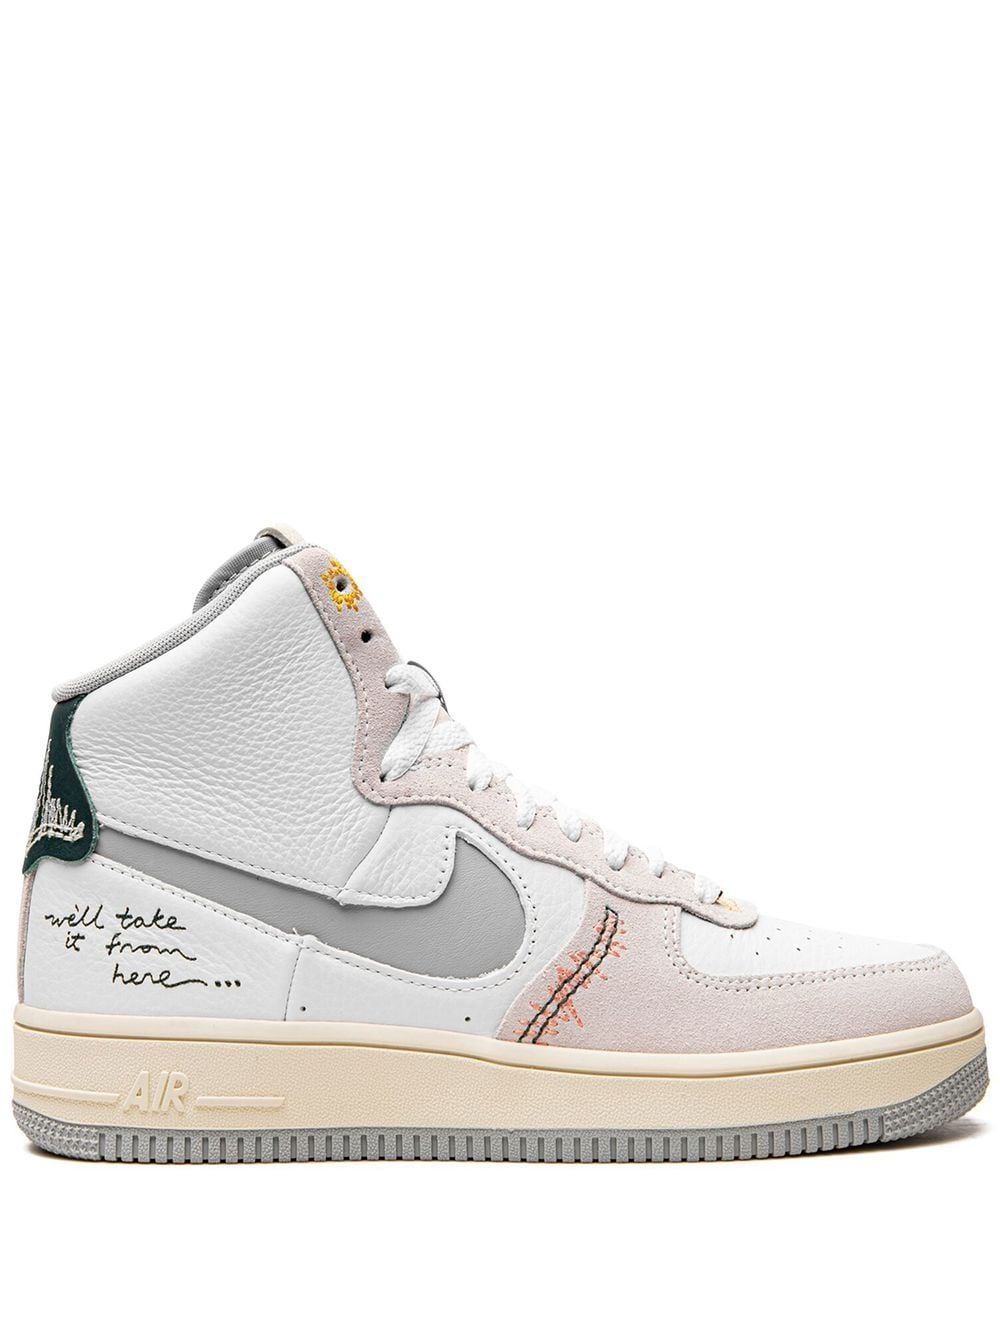 Nike Air Force 1 High Sculpt "We'll Take It From Here" sneakers - White von Nike